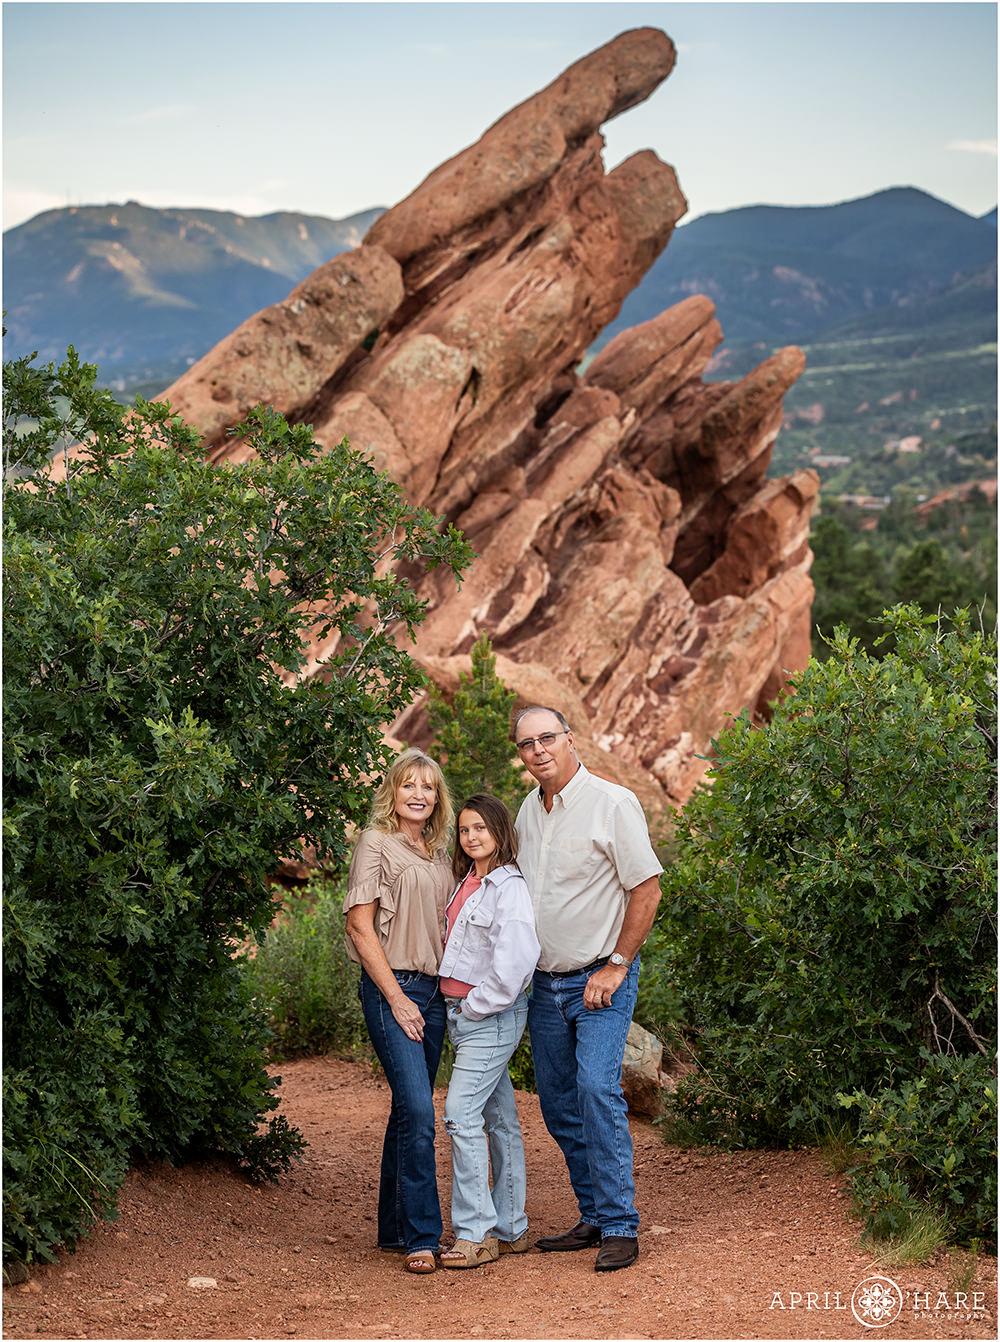 Beautiful family portrait in front of a cool red rocks formation at Garden of the Gods during summer in Colorado